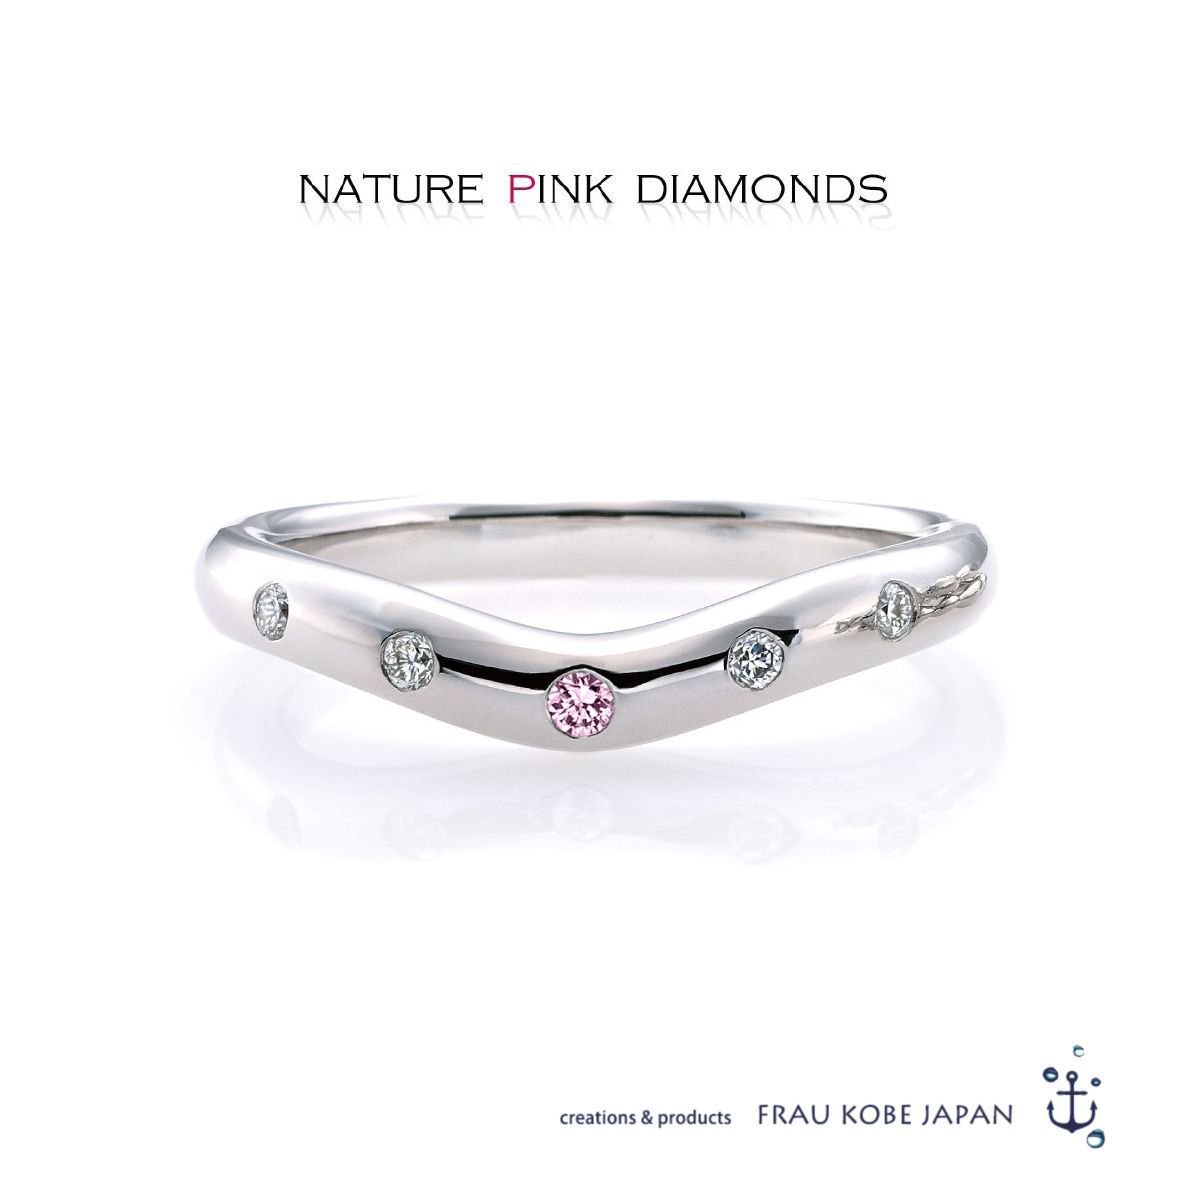 <img class='new_mark_img1' src='https://img.shop-pro.jp/img/new/icons30.gif' style='border:none;display:inline;margin:0px;padding:0px;width:auto;' />「NATURE PINK DIAMONDS -V curve- 」ダイア入りマリッジリング